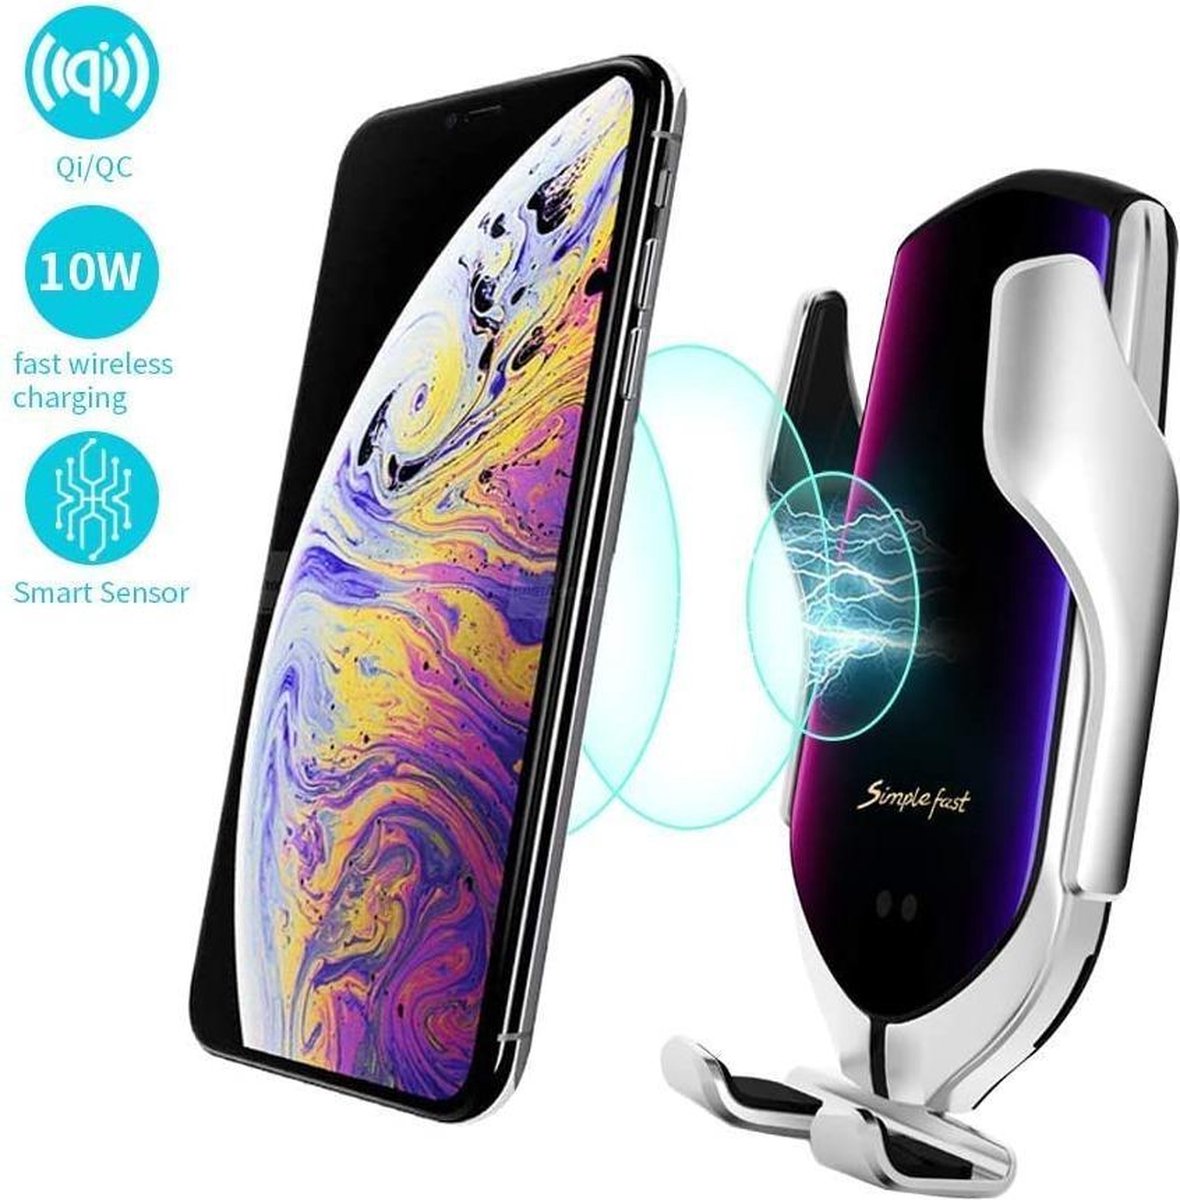 Auto Oplader Draadloos - Wireless Charger - Telefoonhouder - Draadloos Opladen Smartphone - Telefoon Houder Met Autolader iPhone 12 / 11 / Pro / Mini Max / Xs / Xs Max / XR / X /8 / 7 / Samsung Galaxy Note 9 / 10 / 20 / S10 / S20 Plus Ultra - zilver